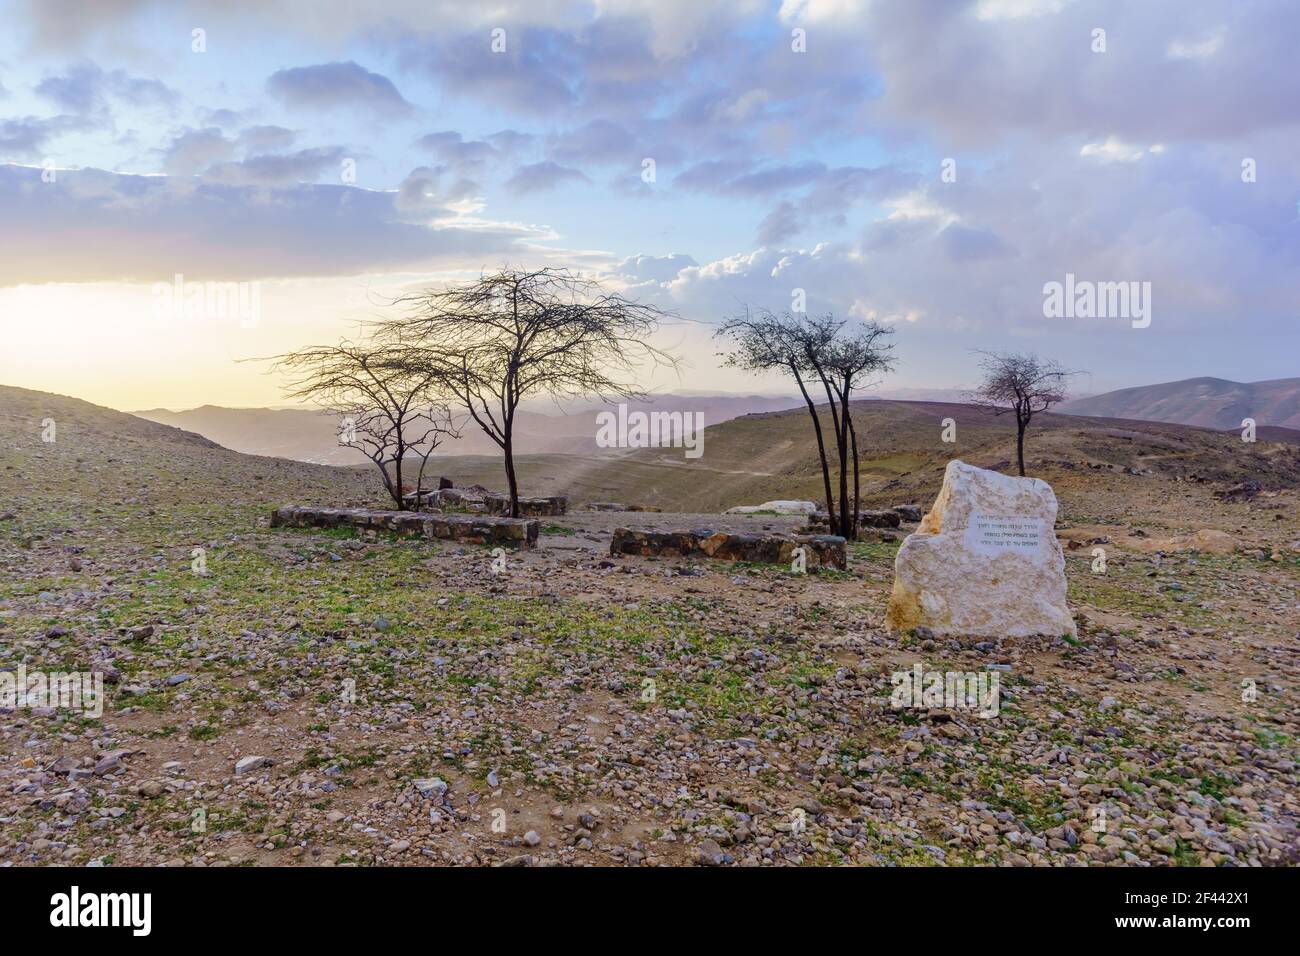 Arad, Israel - March 12, 2021: Morning view of the Gorny observation point, in Arad, Southern Israel Stock Photo